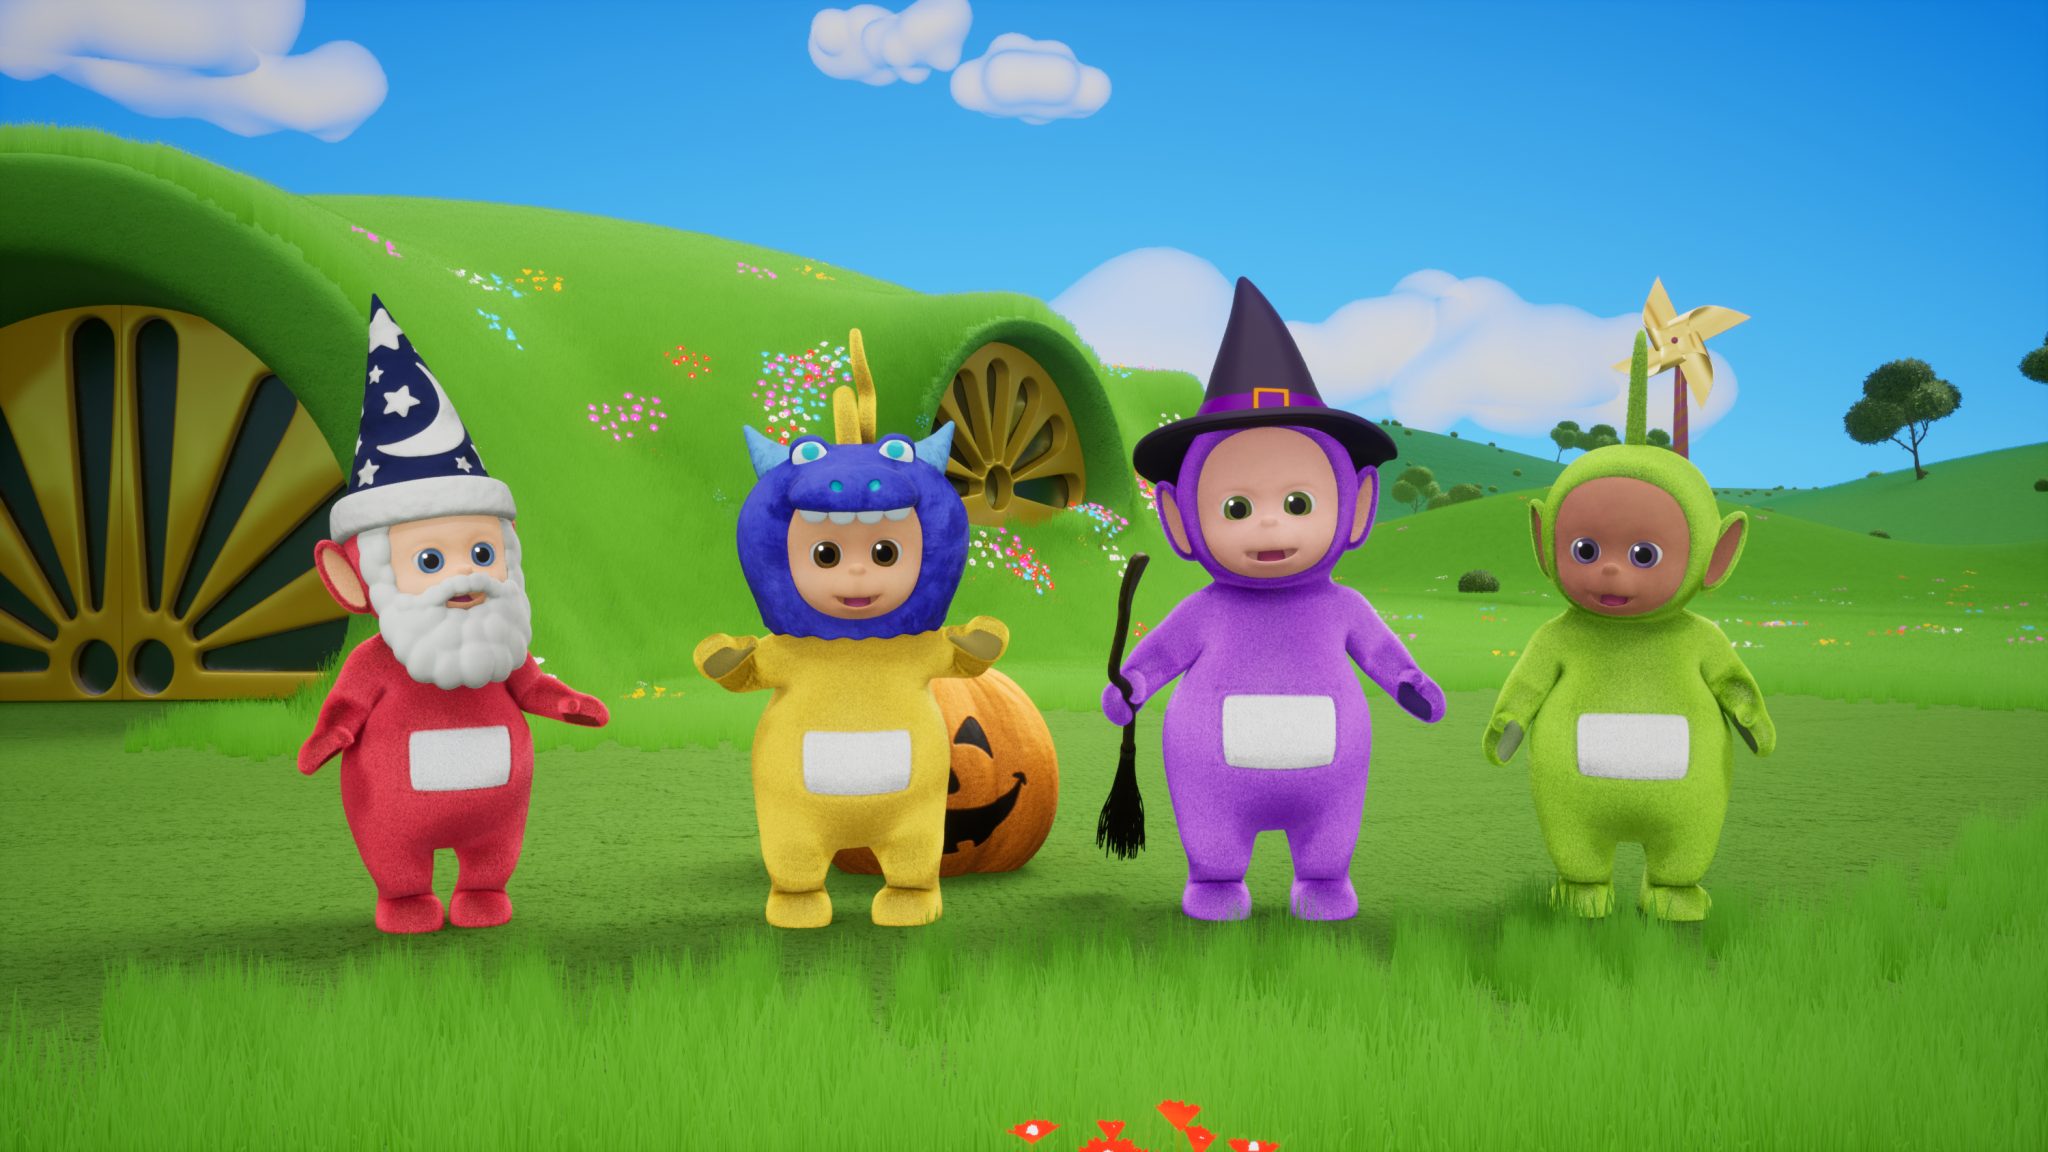 Wildbrain expands 'Teletubbies' into animation - TBI Vision